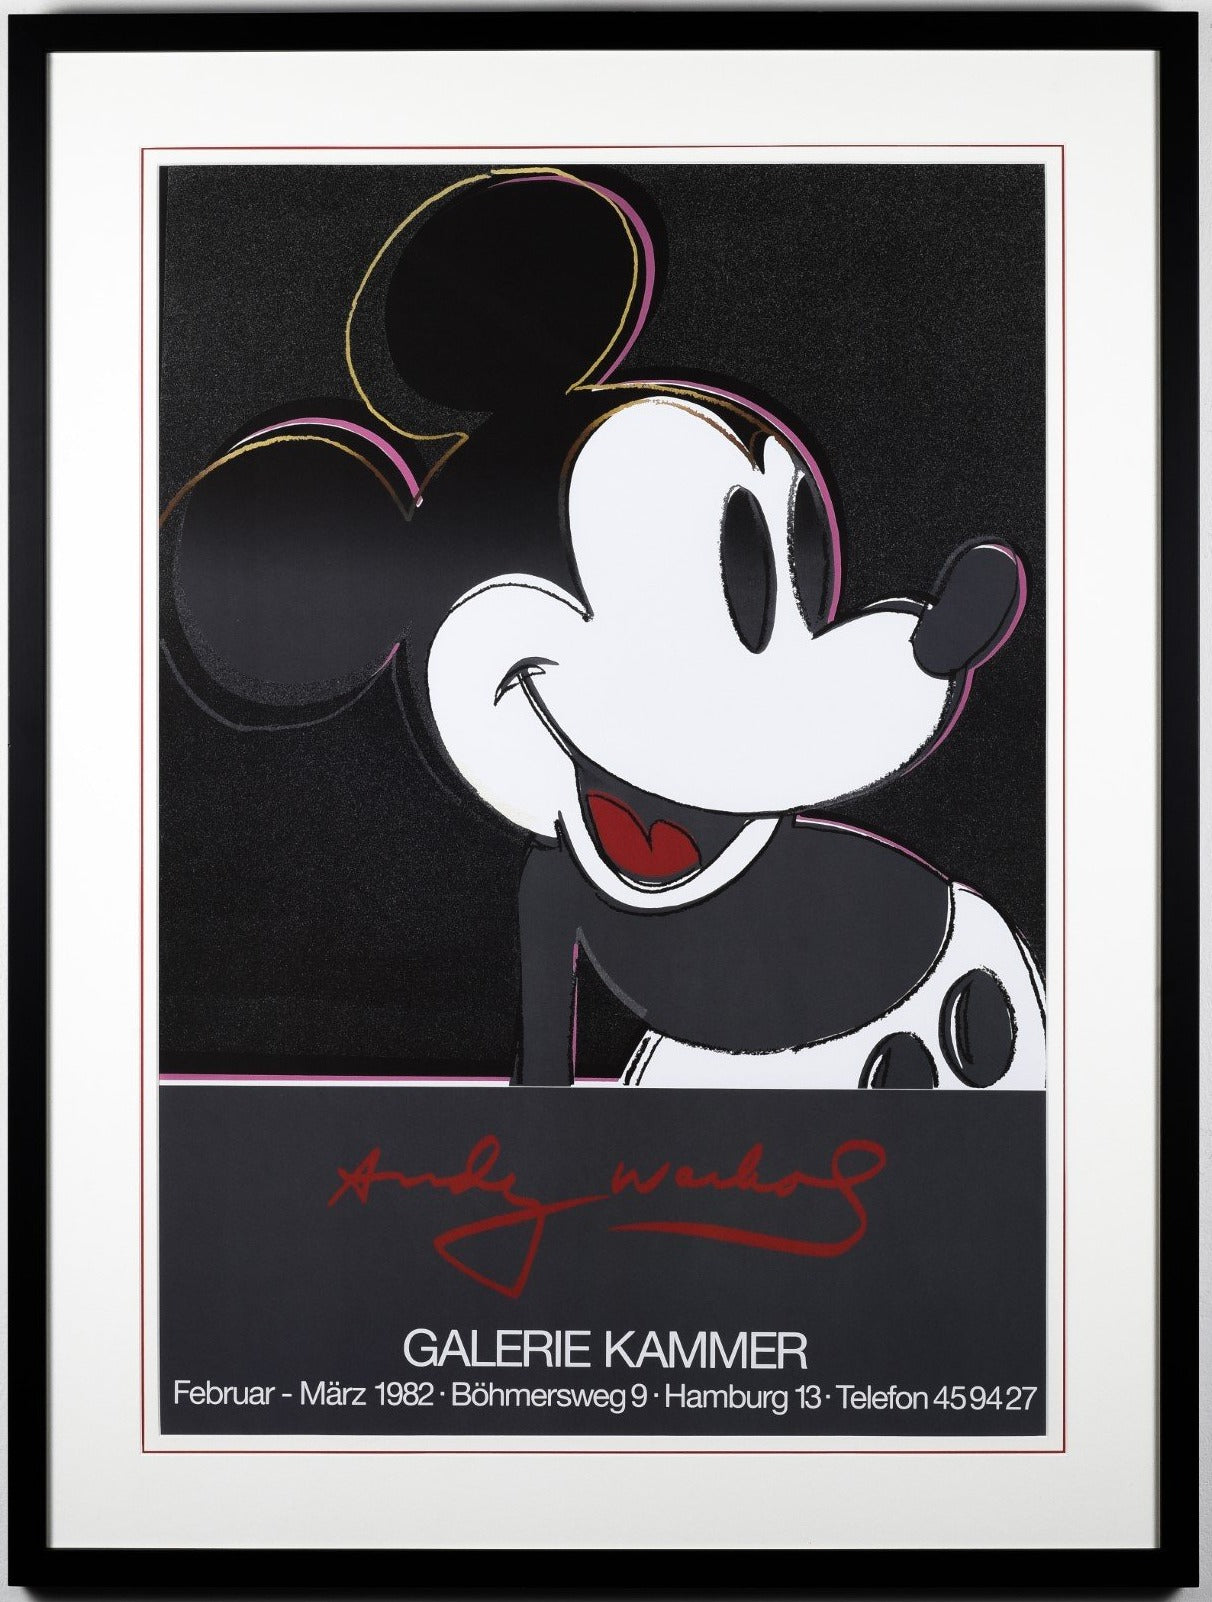 “Mickey Mouse” Kammer Gallery 1982 - Framed